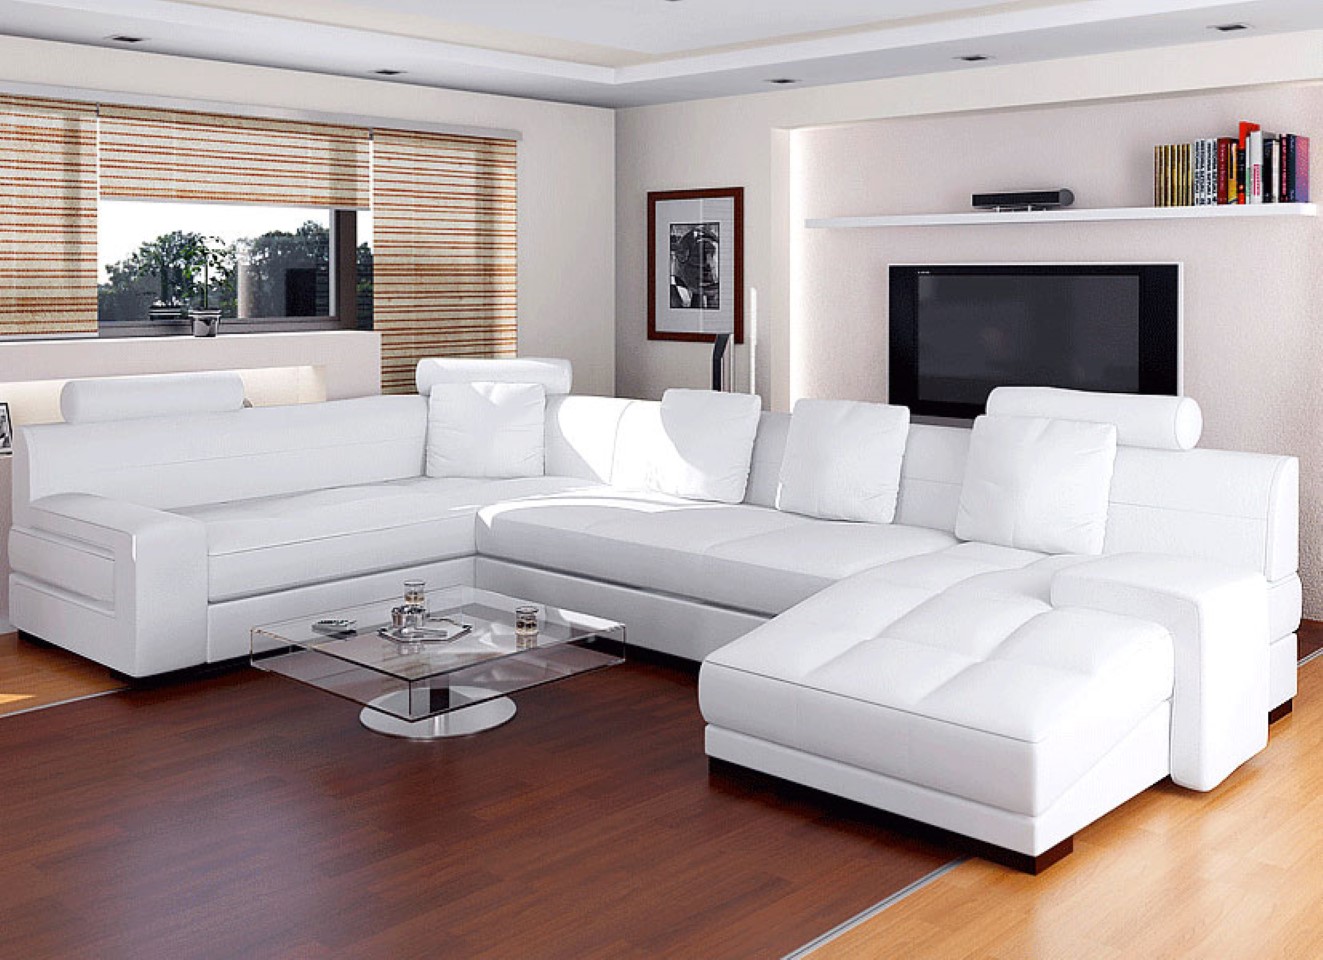 White Leather U Modern White Leather Sofa With U Shaped Design Feat Unique Living Room Bay Window Curtain And Square Glass Coffee Table Furniture  Awesome Modern Luxury White Leather Sofa 